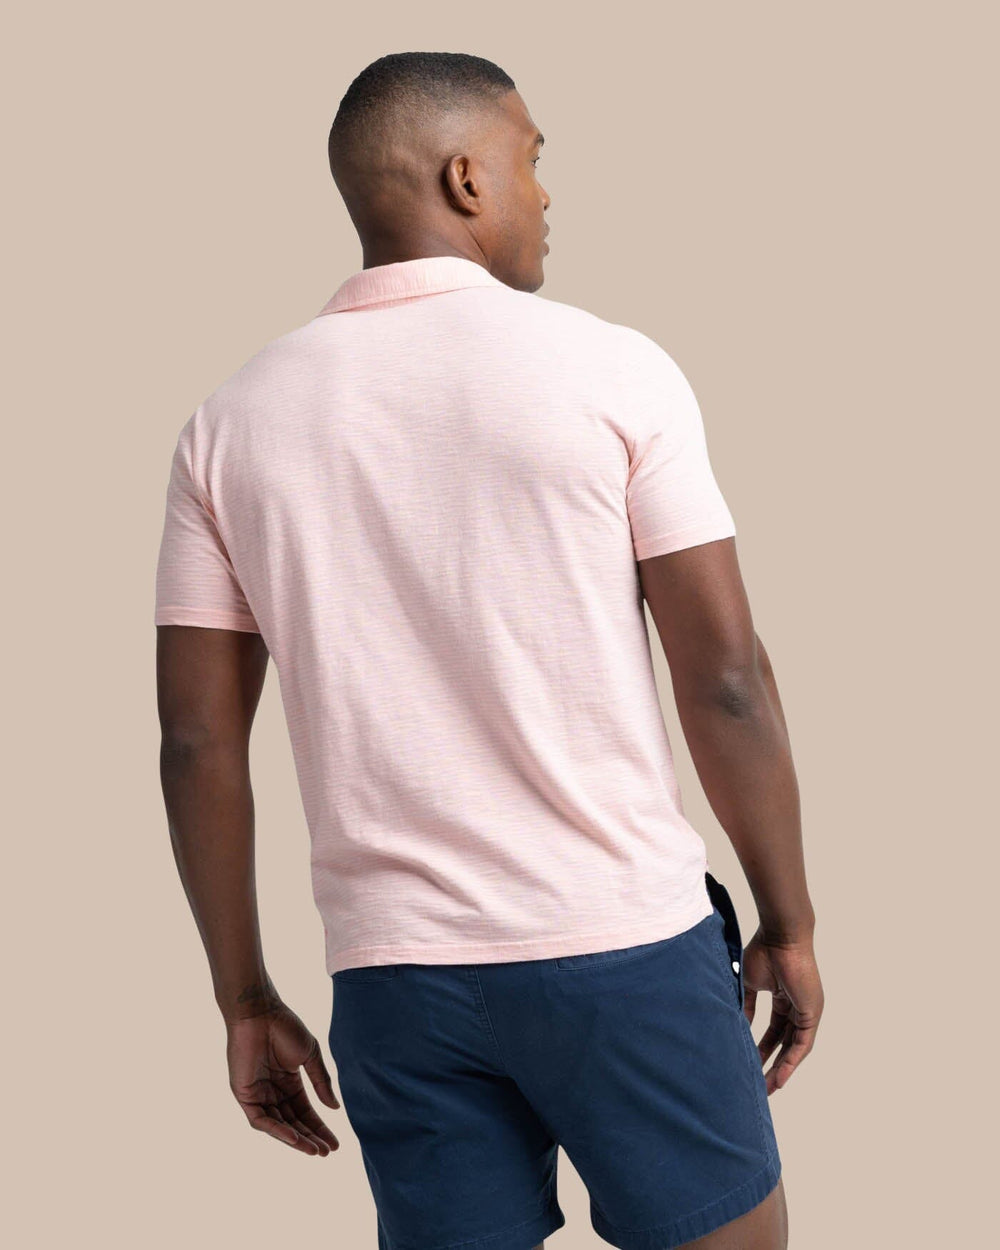 The back view of the Southern Tide Sun Farer Summertree Stripe Polo by Southern Tide - Pale Rosette Pink